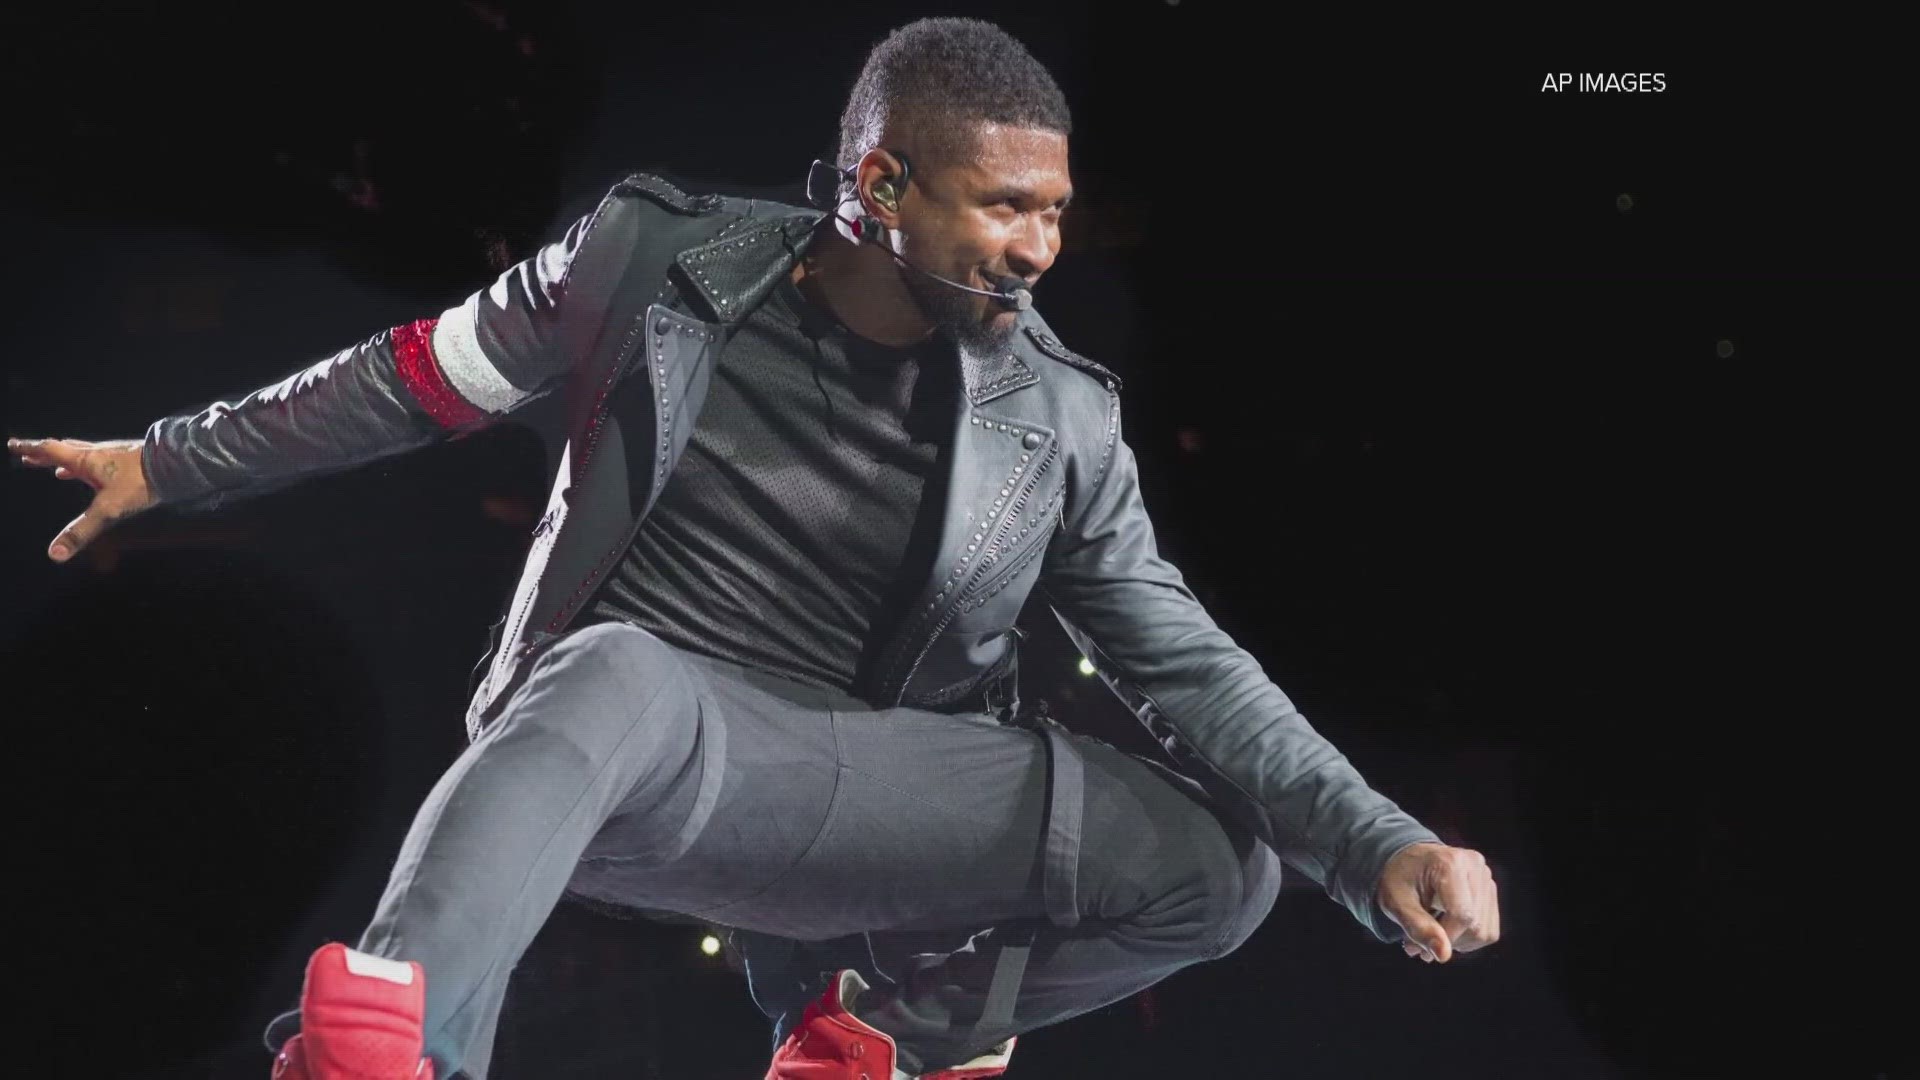 The R&B singer will bring his 24-city tour will visit the Enterprise Center on Saturday, Oct. 26. The tour pays tribute to Usher's 30-year career.